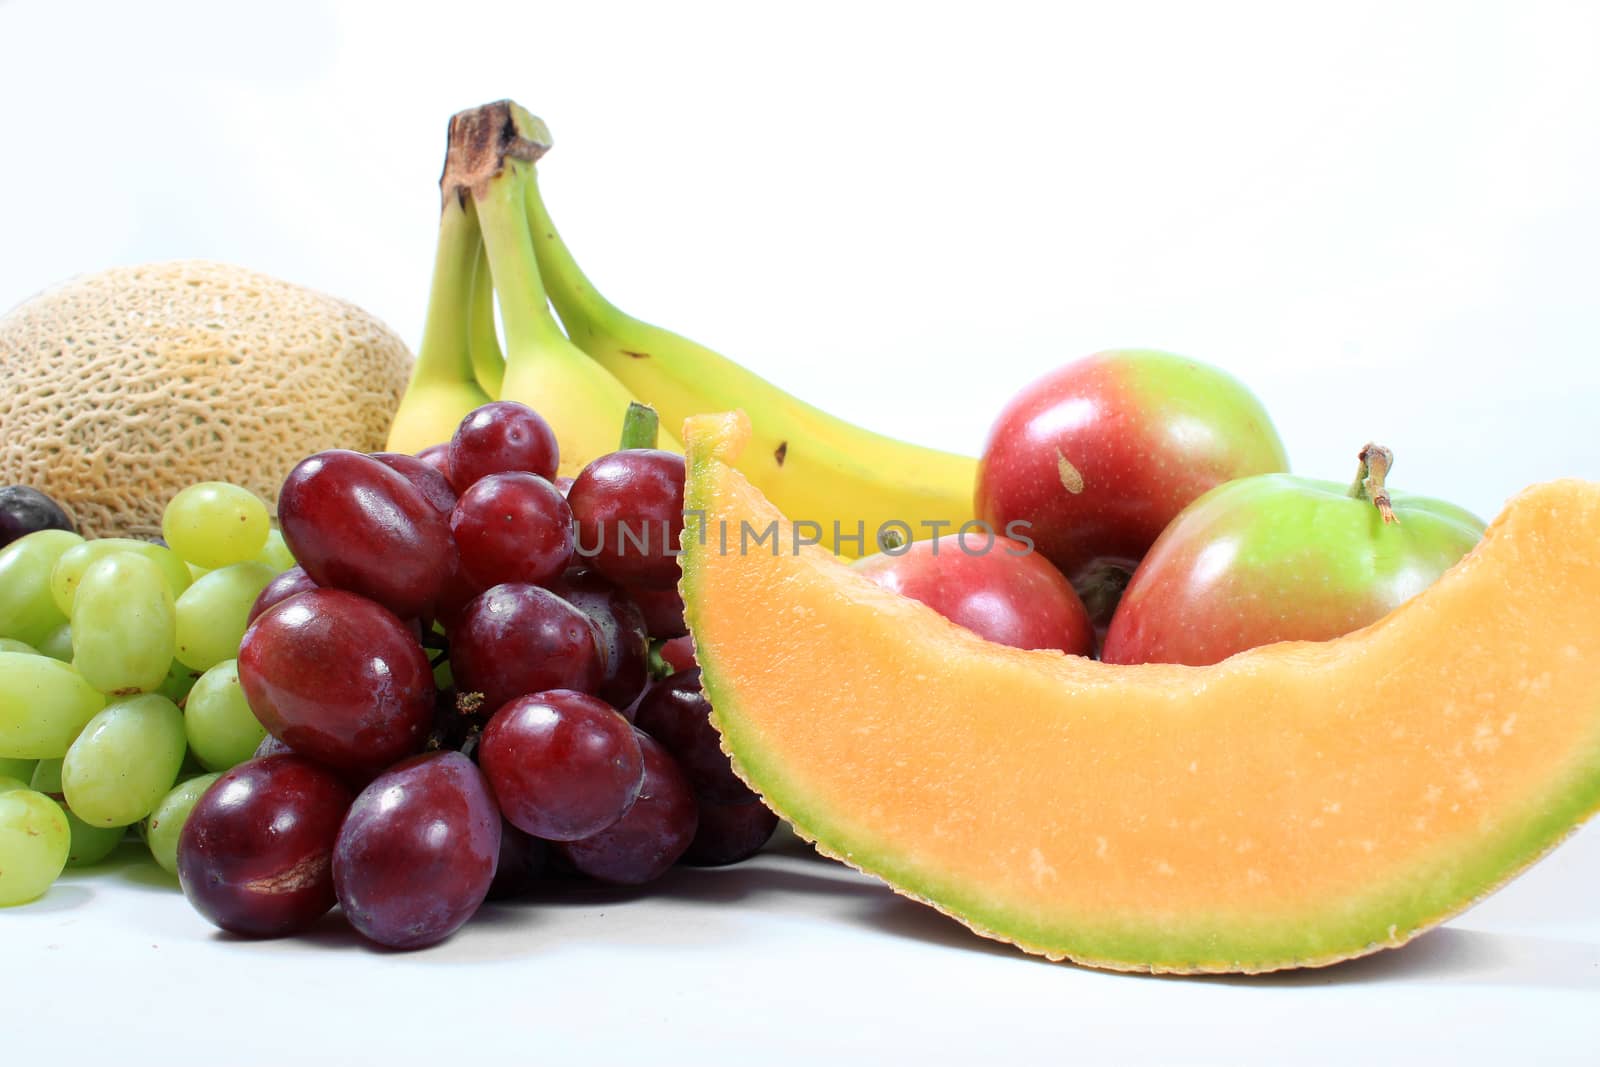 Colorful fresh fruits like grapes, cantaloupe,apples,bananas ,and grapes on a white background